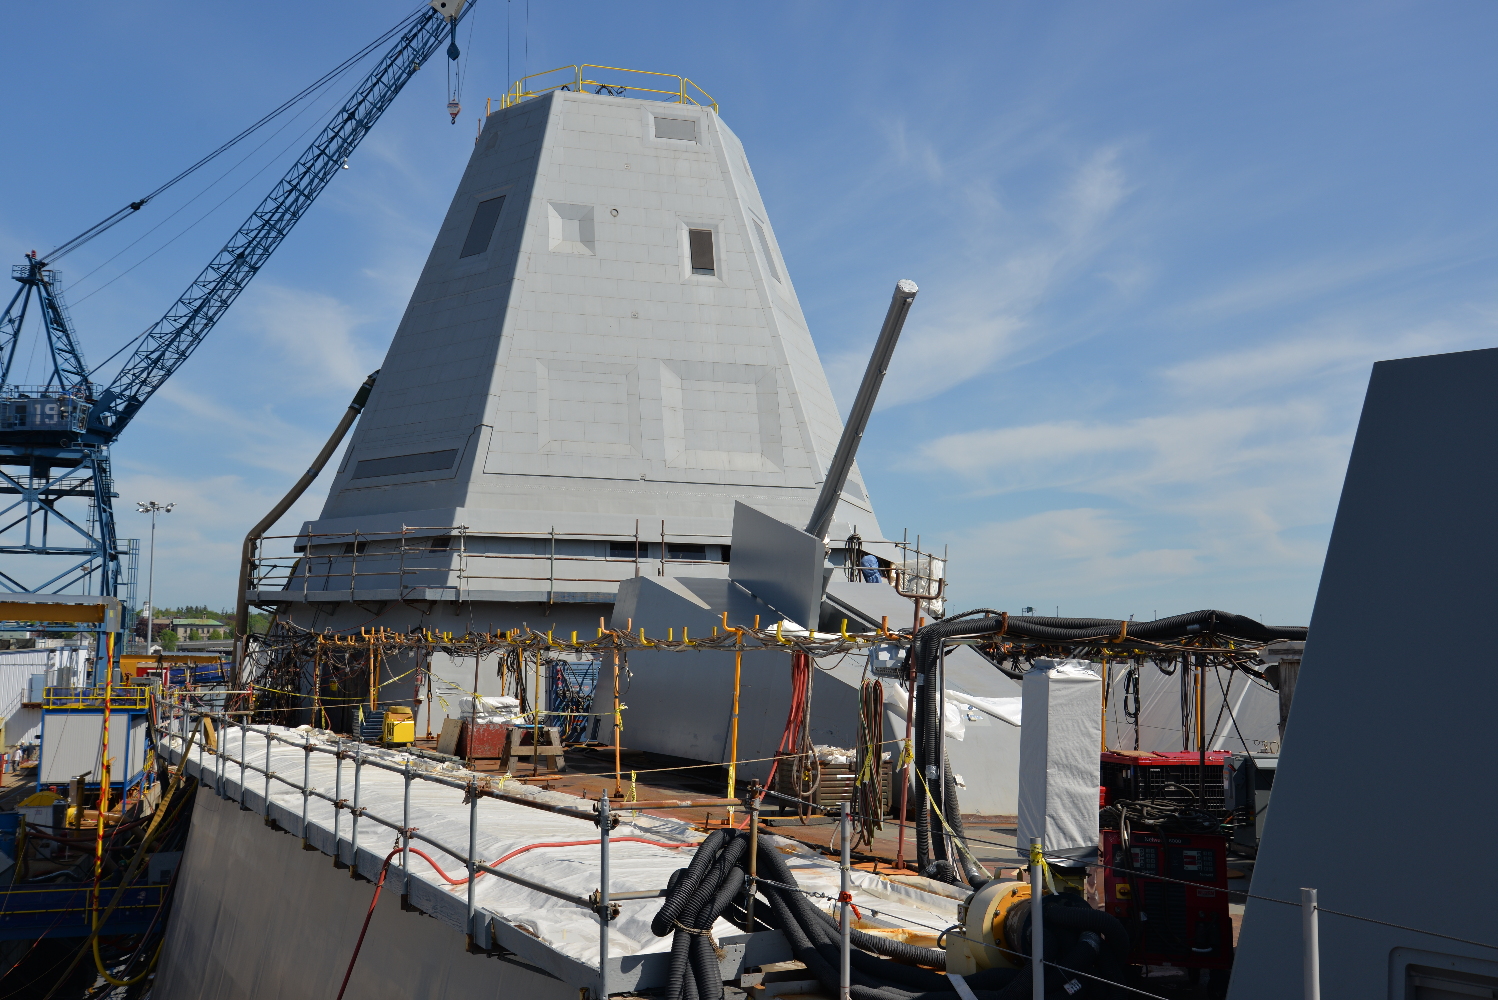 The bridge windows are more visible here. Note the many recesses in the superstructure for radars and sensors. 